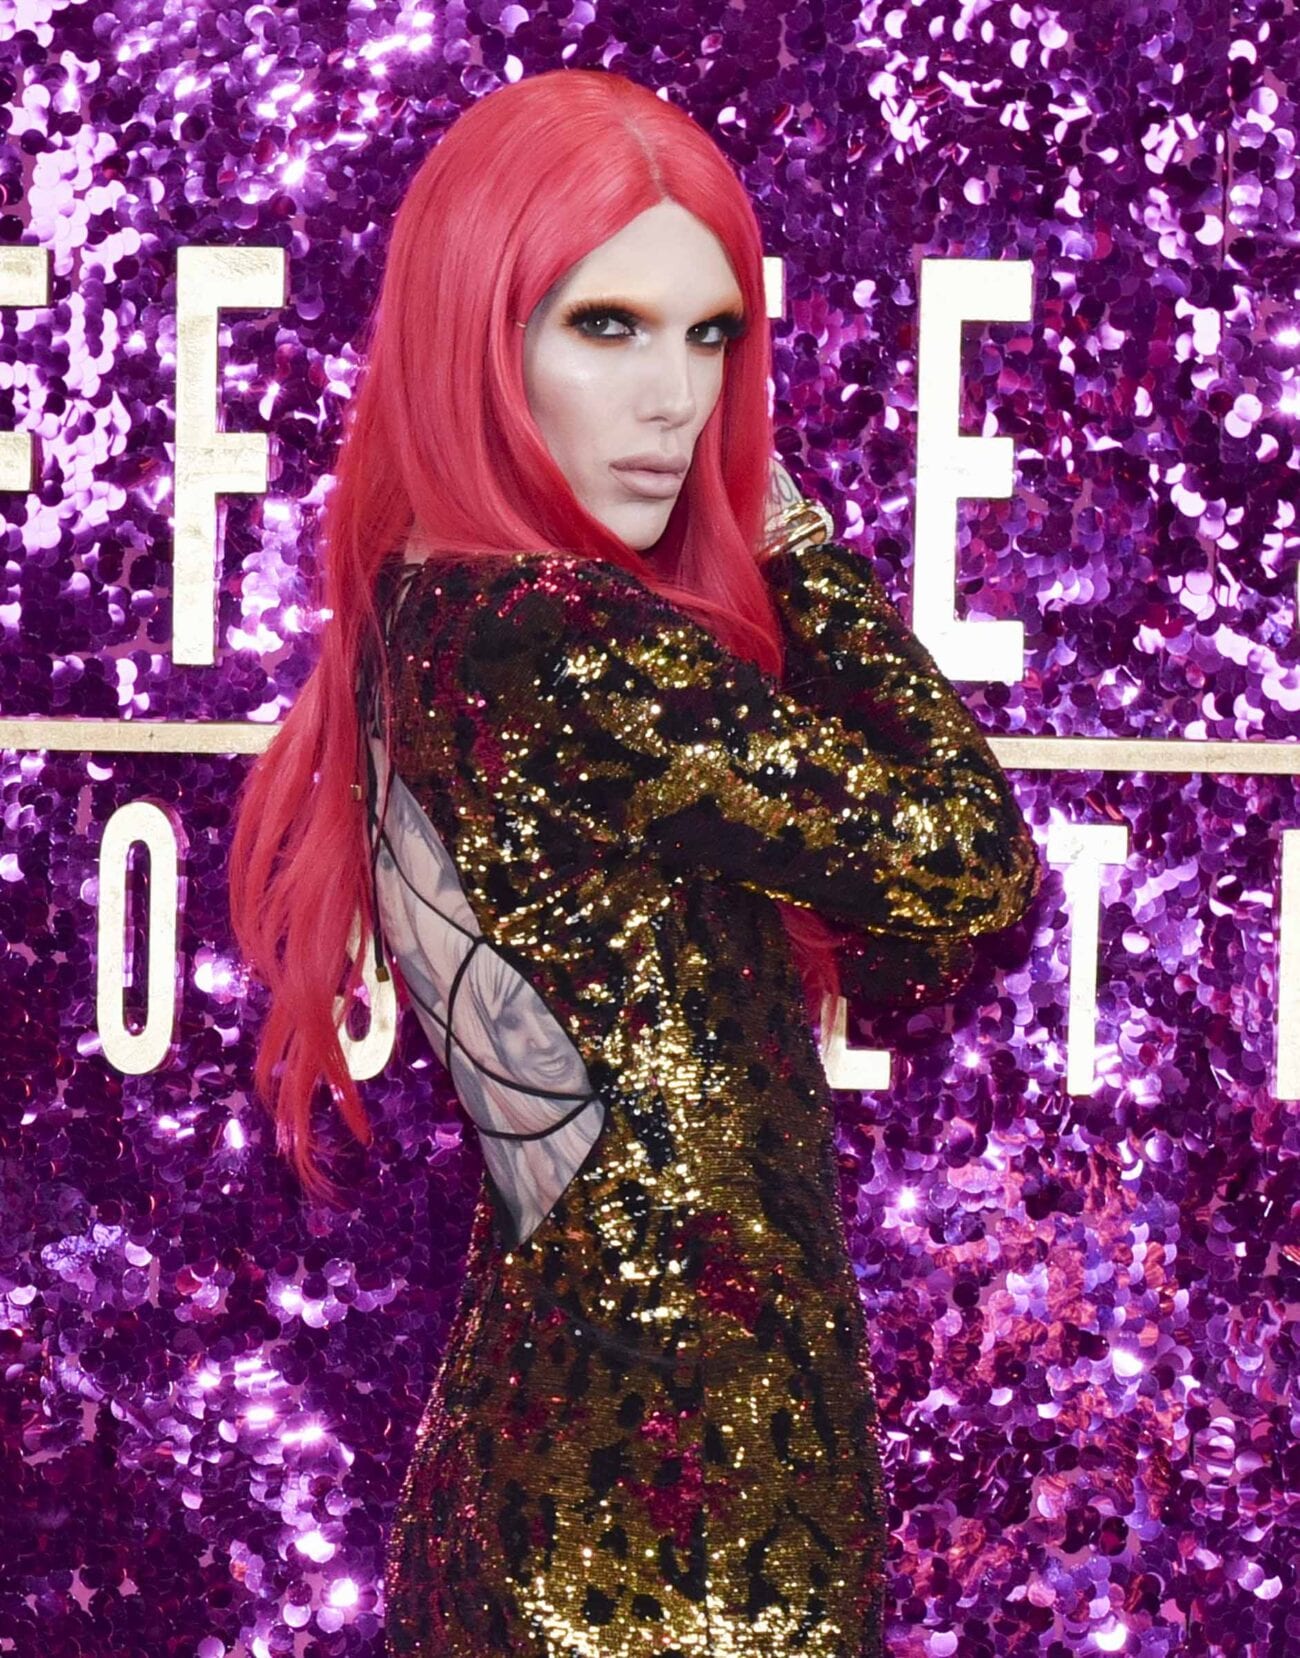 Jeffree Star seems untouchable, but will a sexual assault allegation finally hurt his sub count? Read more on the new allegations.